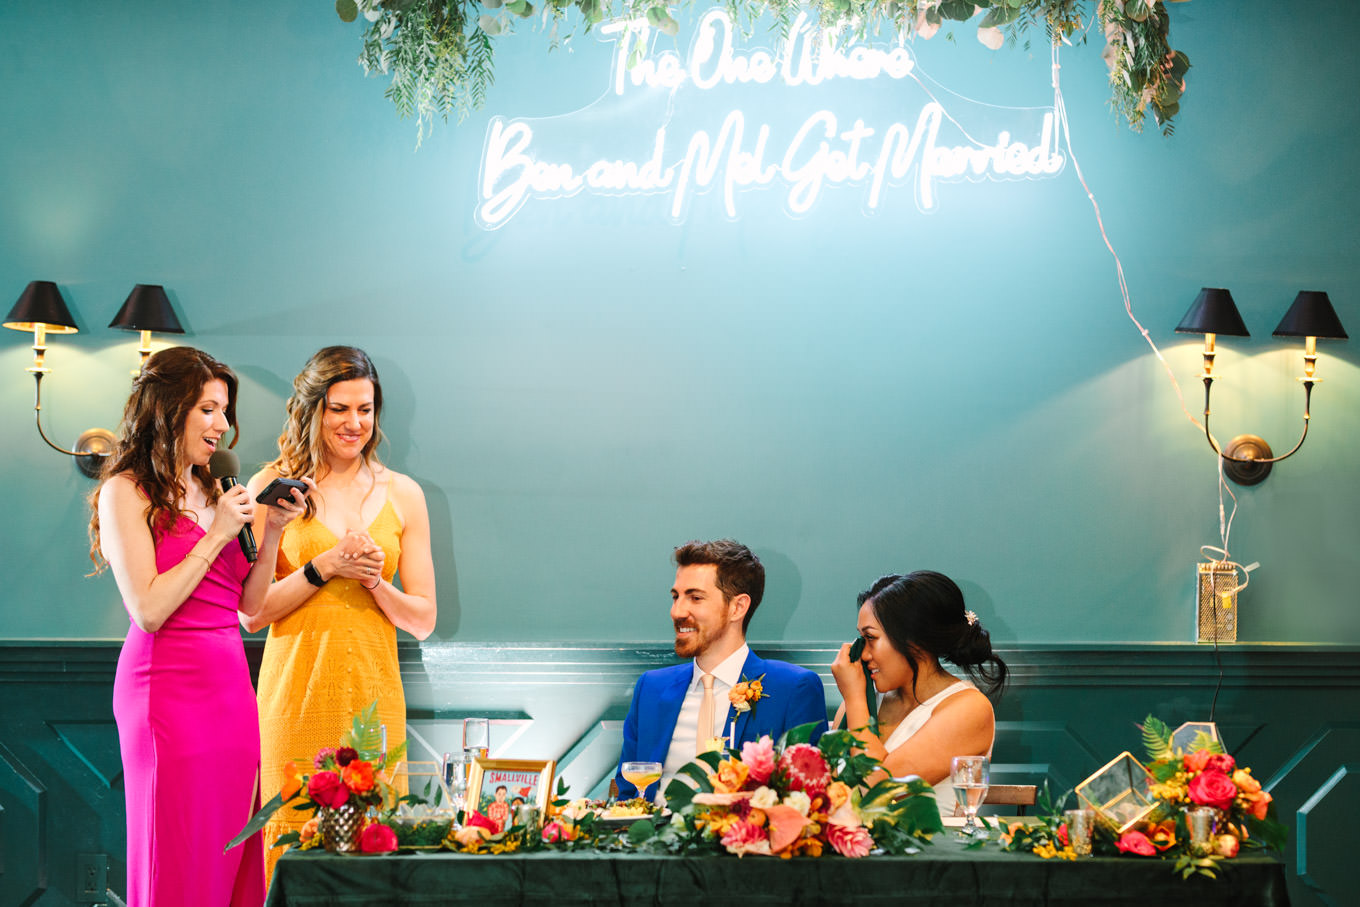 Sisters giving toast at wedding | TV inspired wedding at The Fig House Los Angeles | Published on The Knot | Fresh and colorful photography for fun-loving couples in Southern California | #losangeleswedding #TVwedding #colorfulwedding #theknot   Source: Mary Costa Photography | Los Angeles wedding photographer